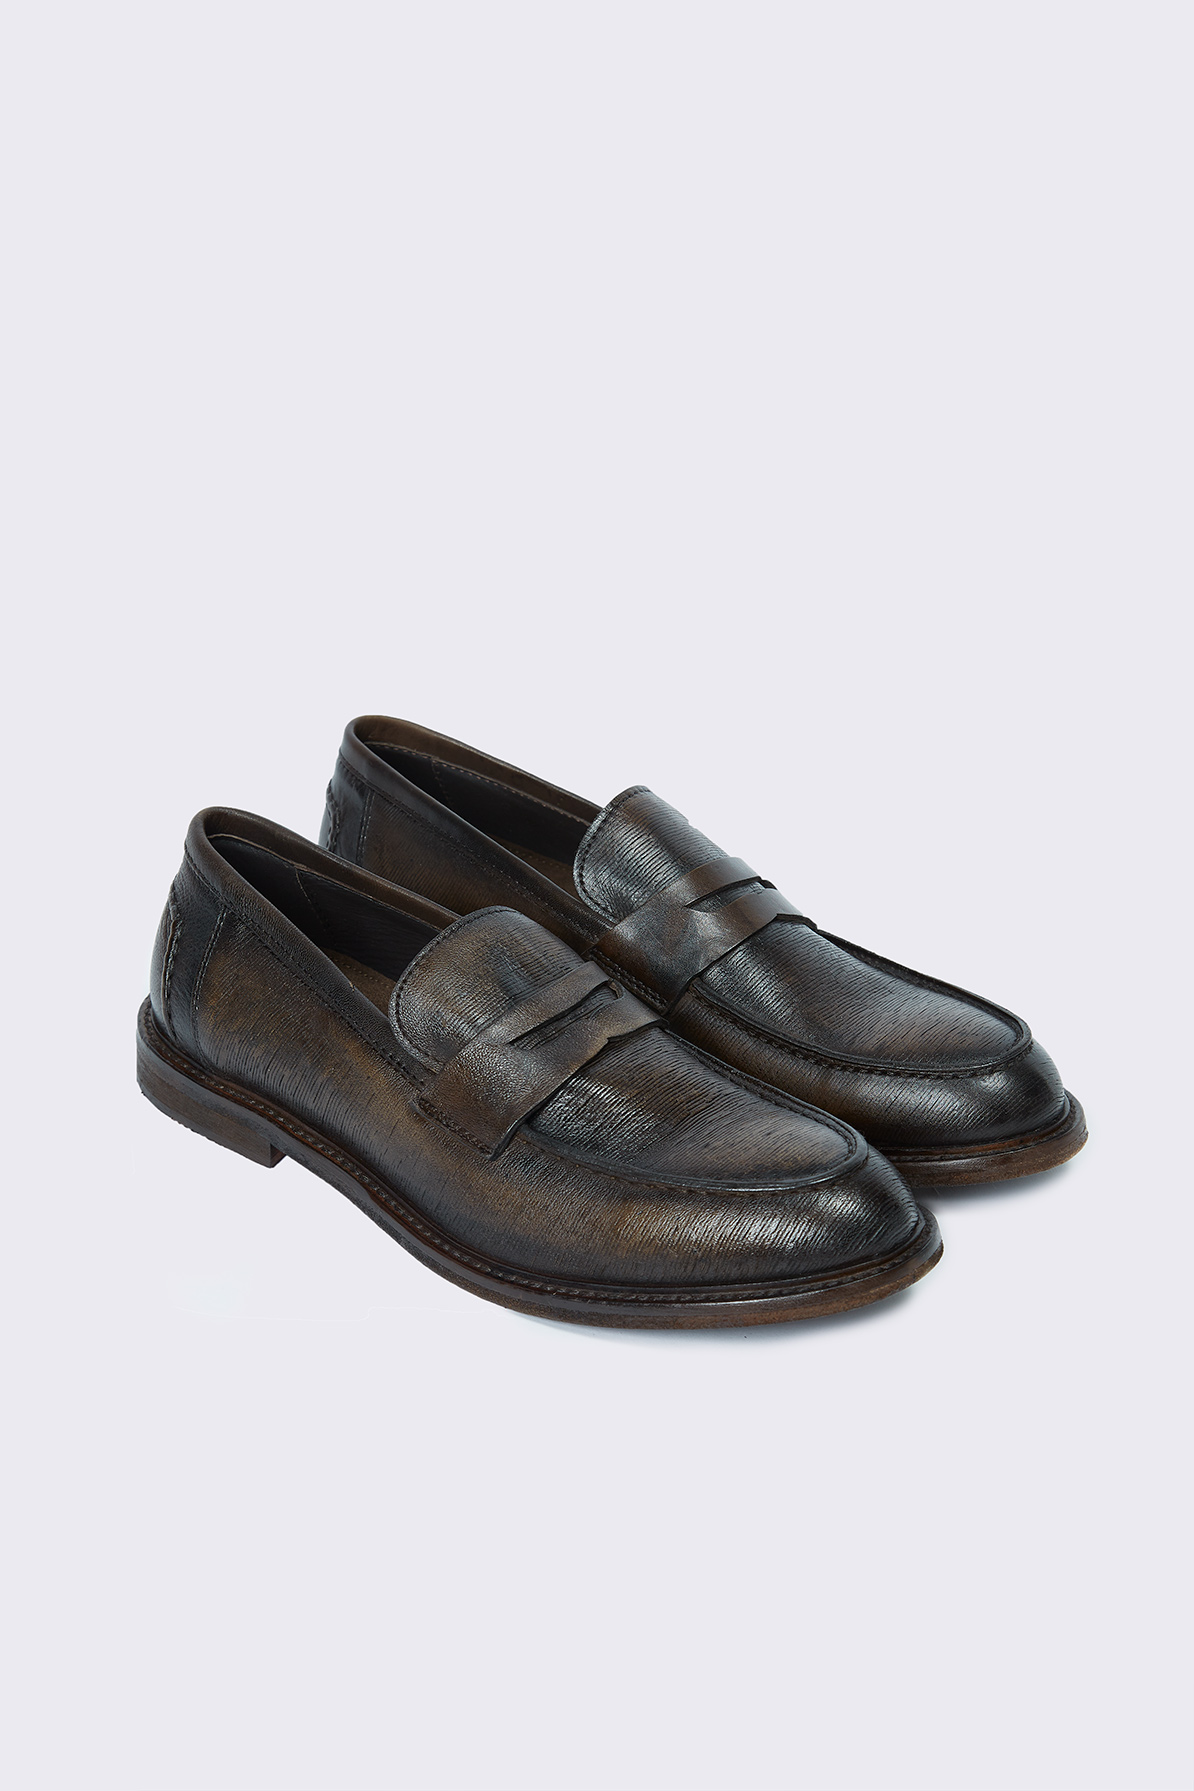 DARK BROWN LEATHER PENNY LOAFER